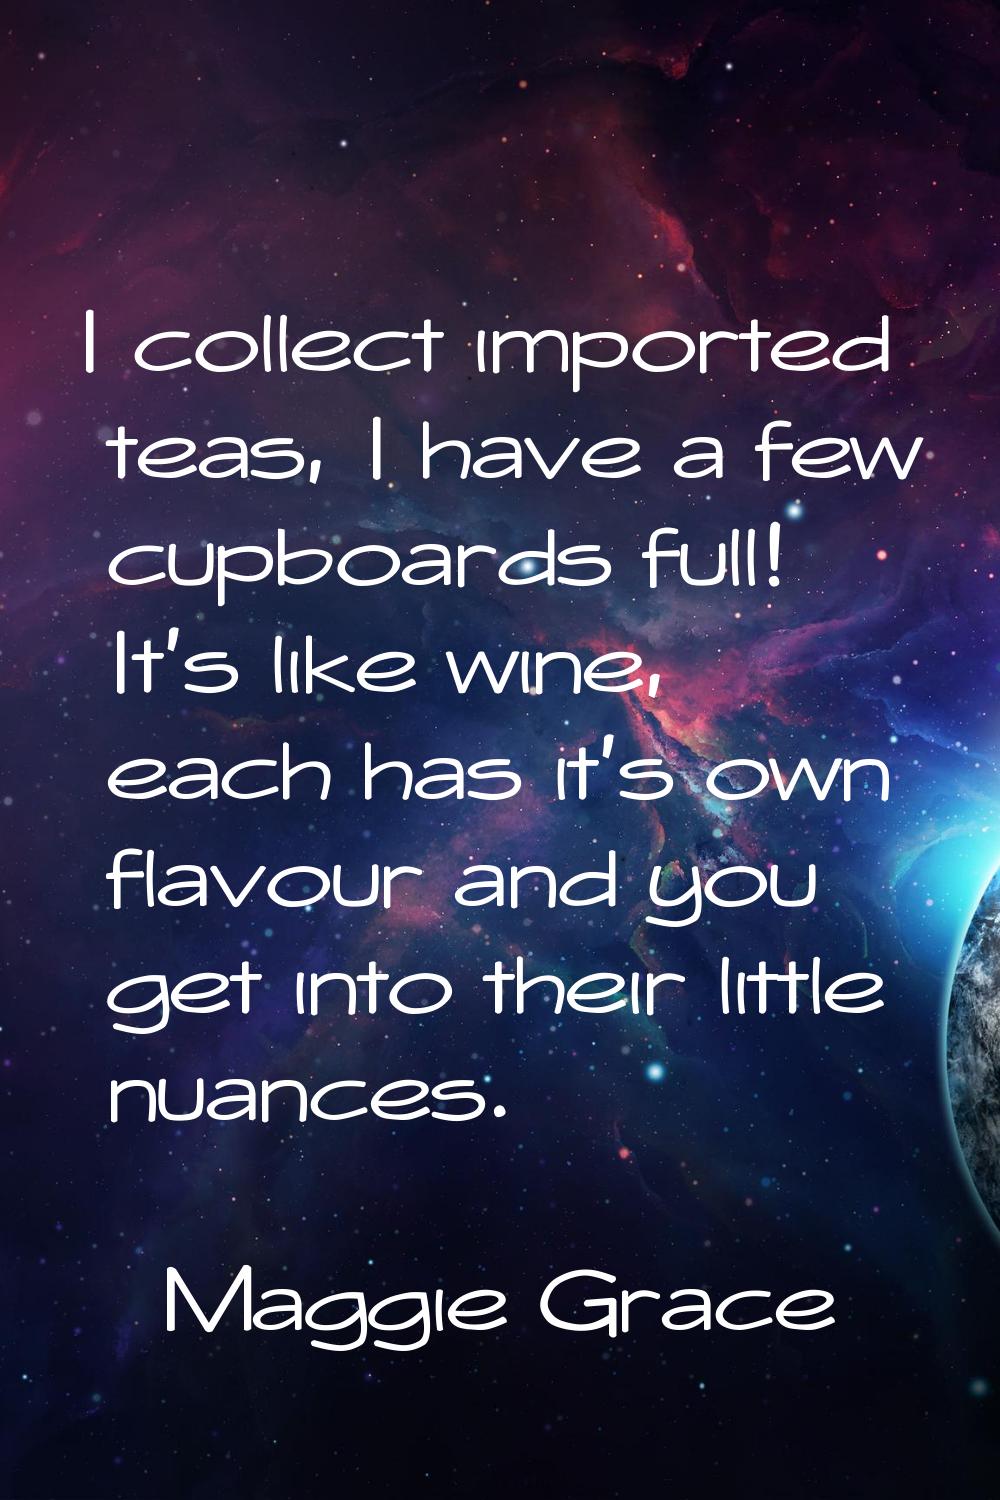 I collect imported teas, I have a few cupboards full! It's like wine, each has it's own flavour and